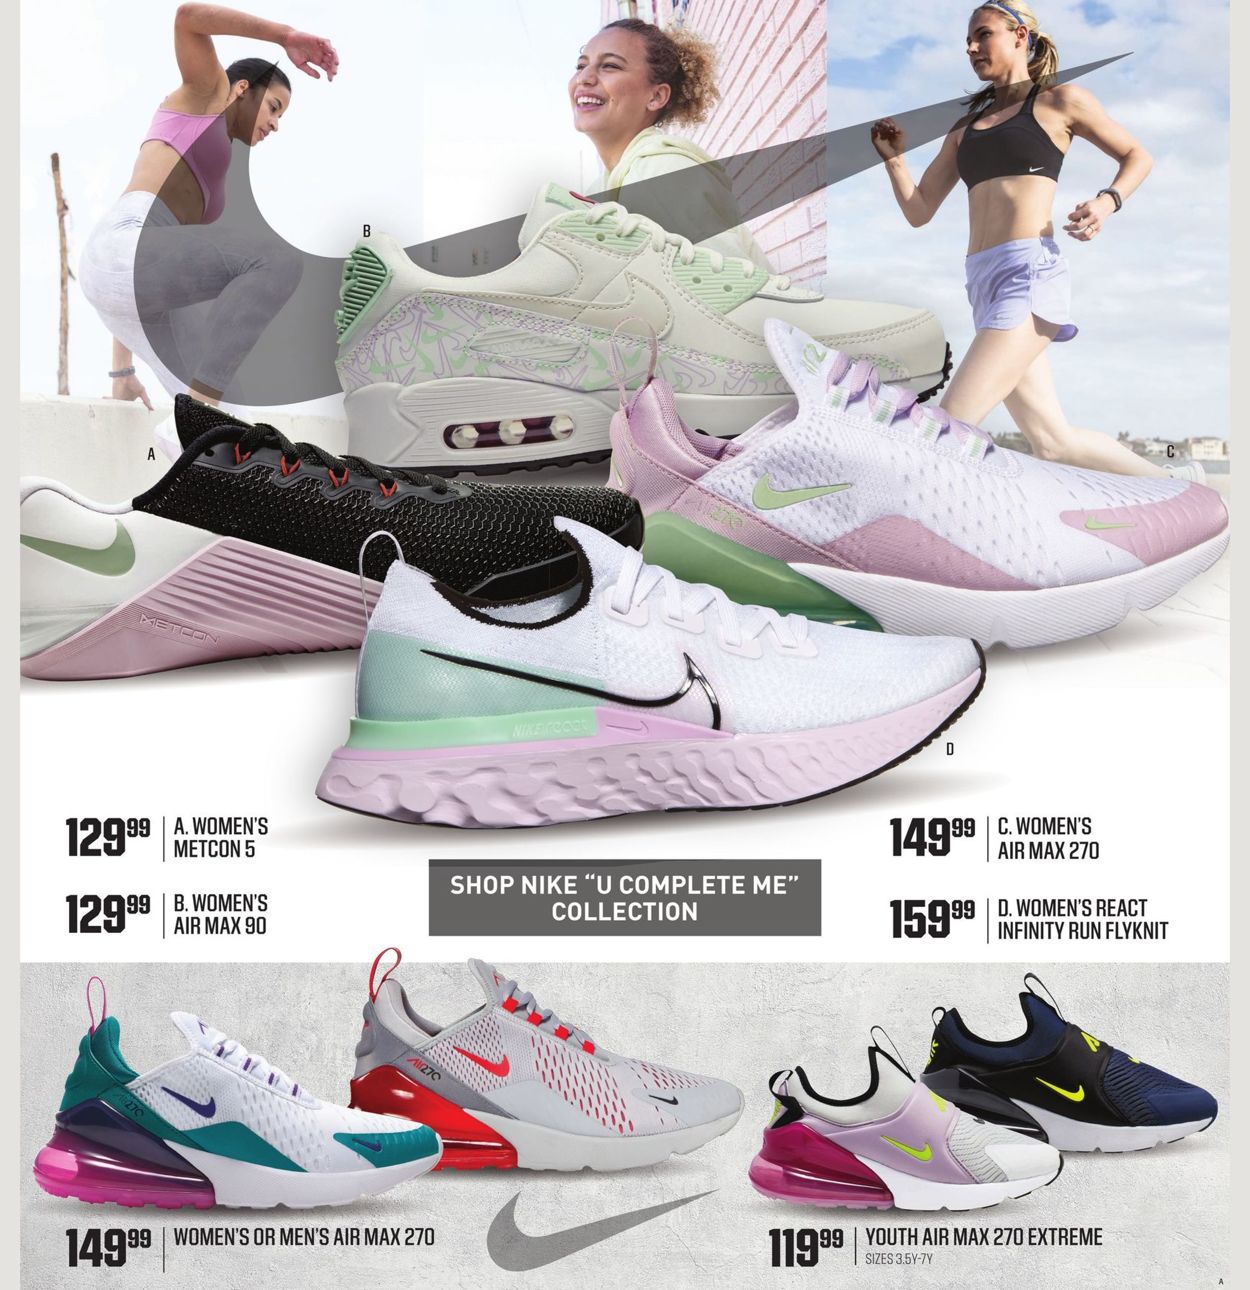 nike u complete me collection